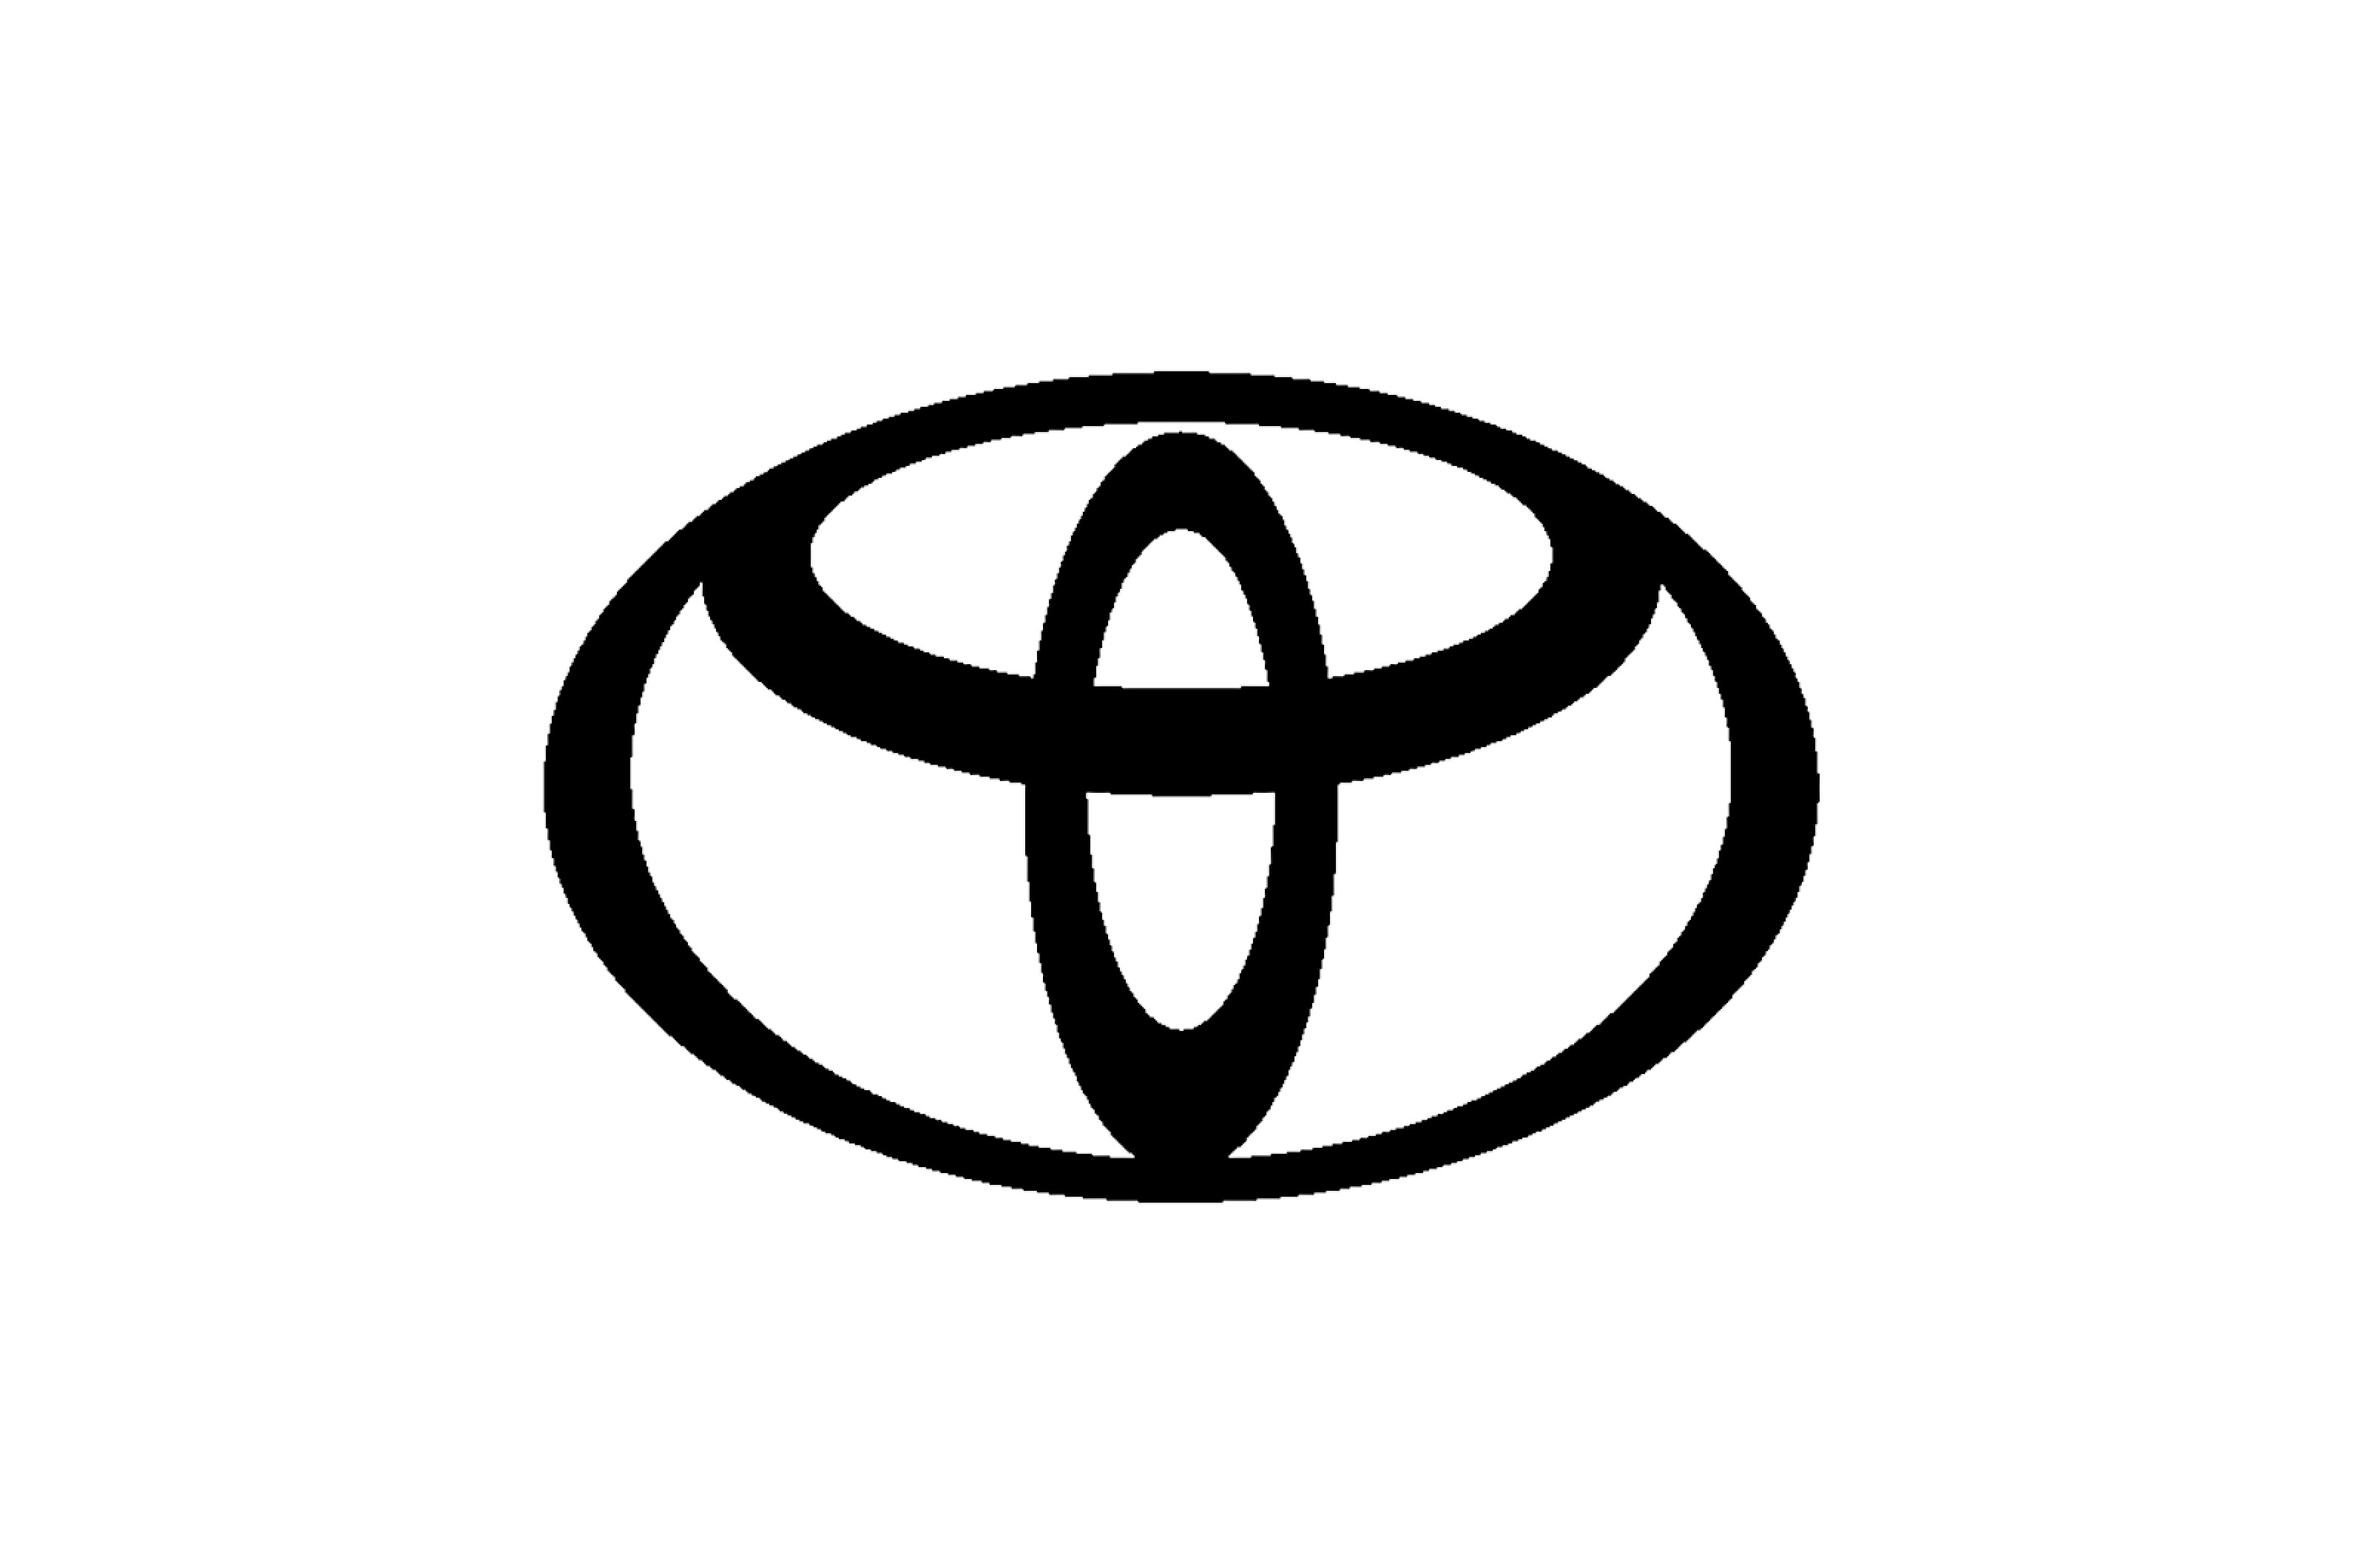 <p>Toyota’s current logo first appeared in 1989 on a model known as the Celsior, though this went unnoticed in markets where that car was sold (with a different badge) as the Lexus LS400.</p>  <p>Although at first glance it looks like a heavily stylized letter T, the logo in fact consists of three ovals. According to Toyota, the inner ones represent the hearts of the customer and the company, while the large one surrounding them represents the world.</p>  <p>Even more fancifully, the apparently empty space not taken up by ovals is not officially empty at all. Instead, it stands for Toyota’s ‘infinite values’ of quality, value, innovation, safety, the environment, social responsibility and the joy of driving.</p>  <p>The logo was updated in 2006 to look more three-dimensional and metallic, but in 2020 Toyota succumbed to the new fashion for austerity and re-rendered it in flat black-and-white.</p>